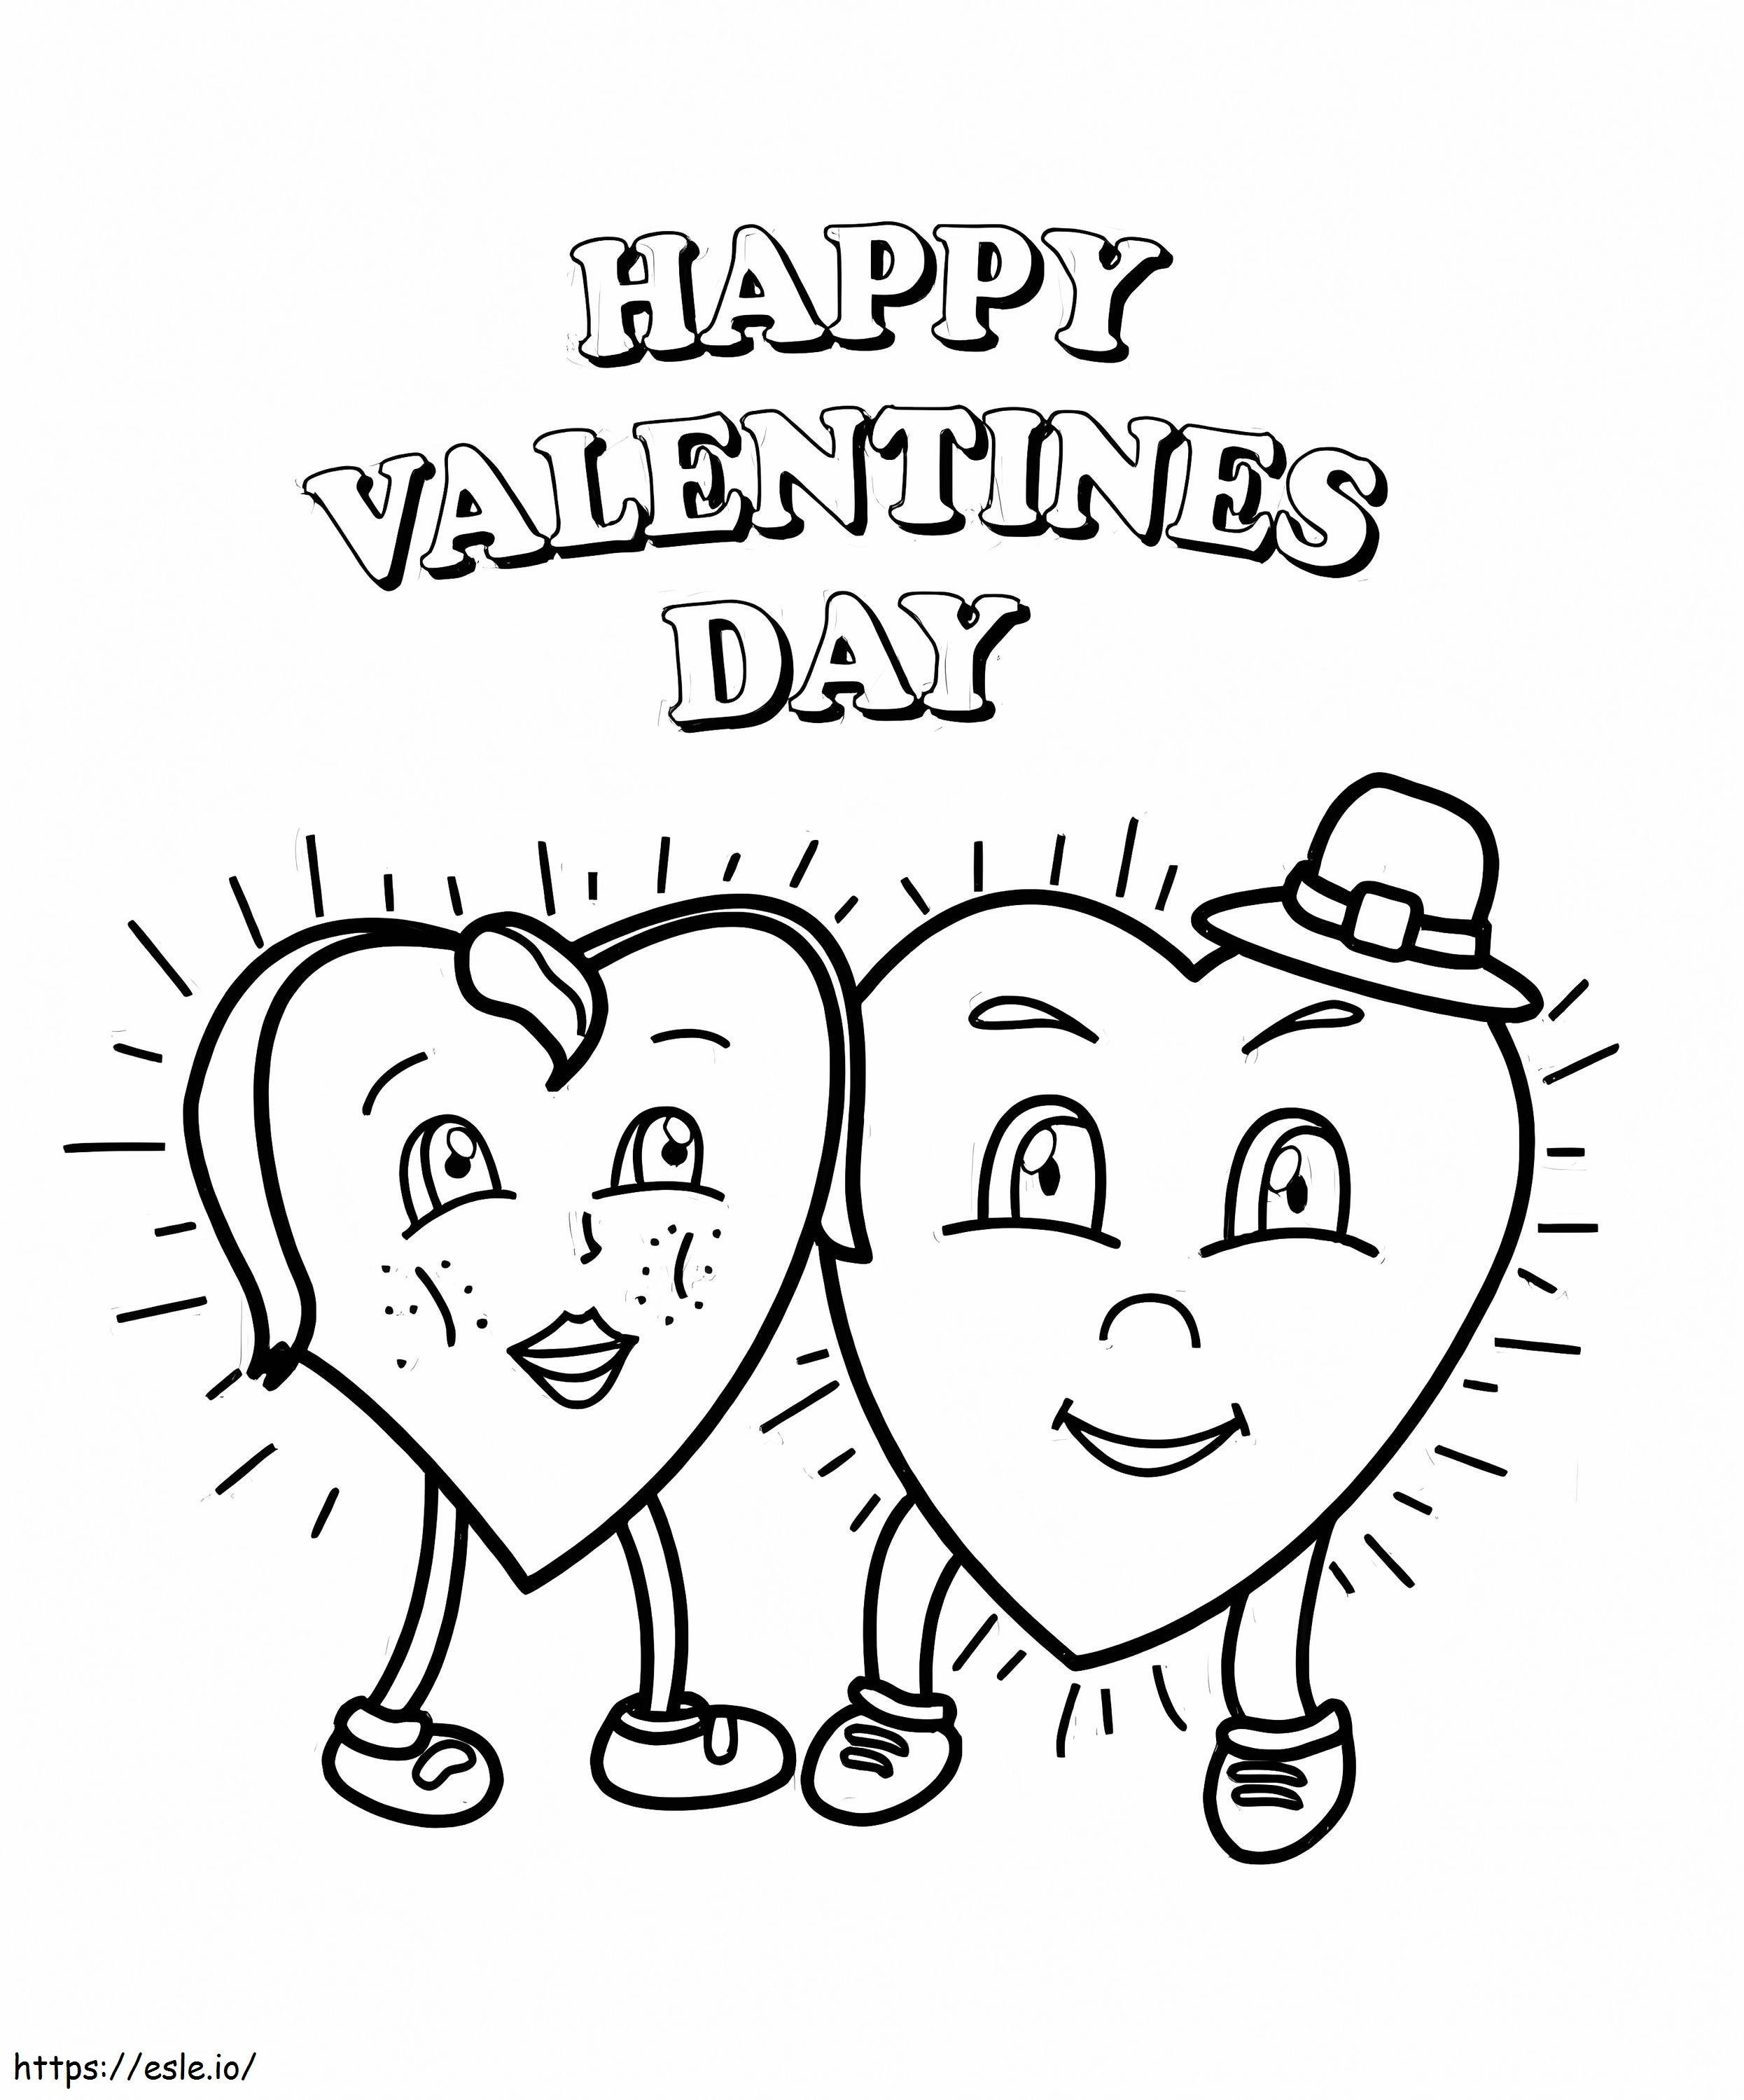 Happy Valentines Day 4 coloring page